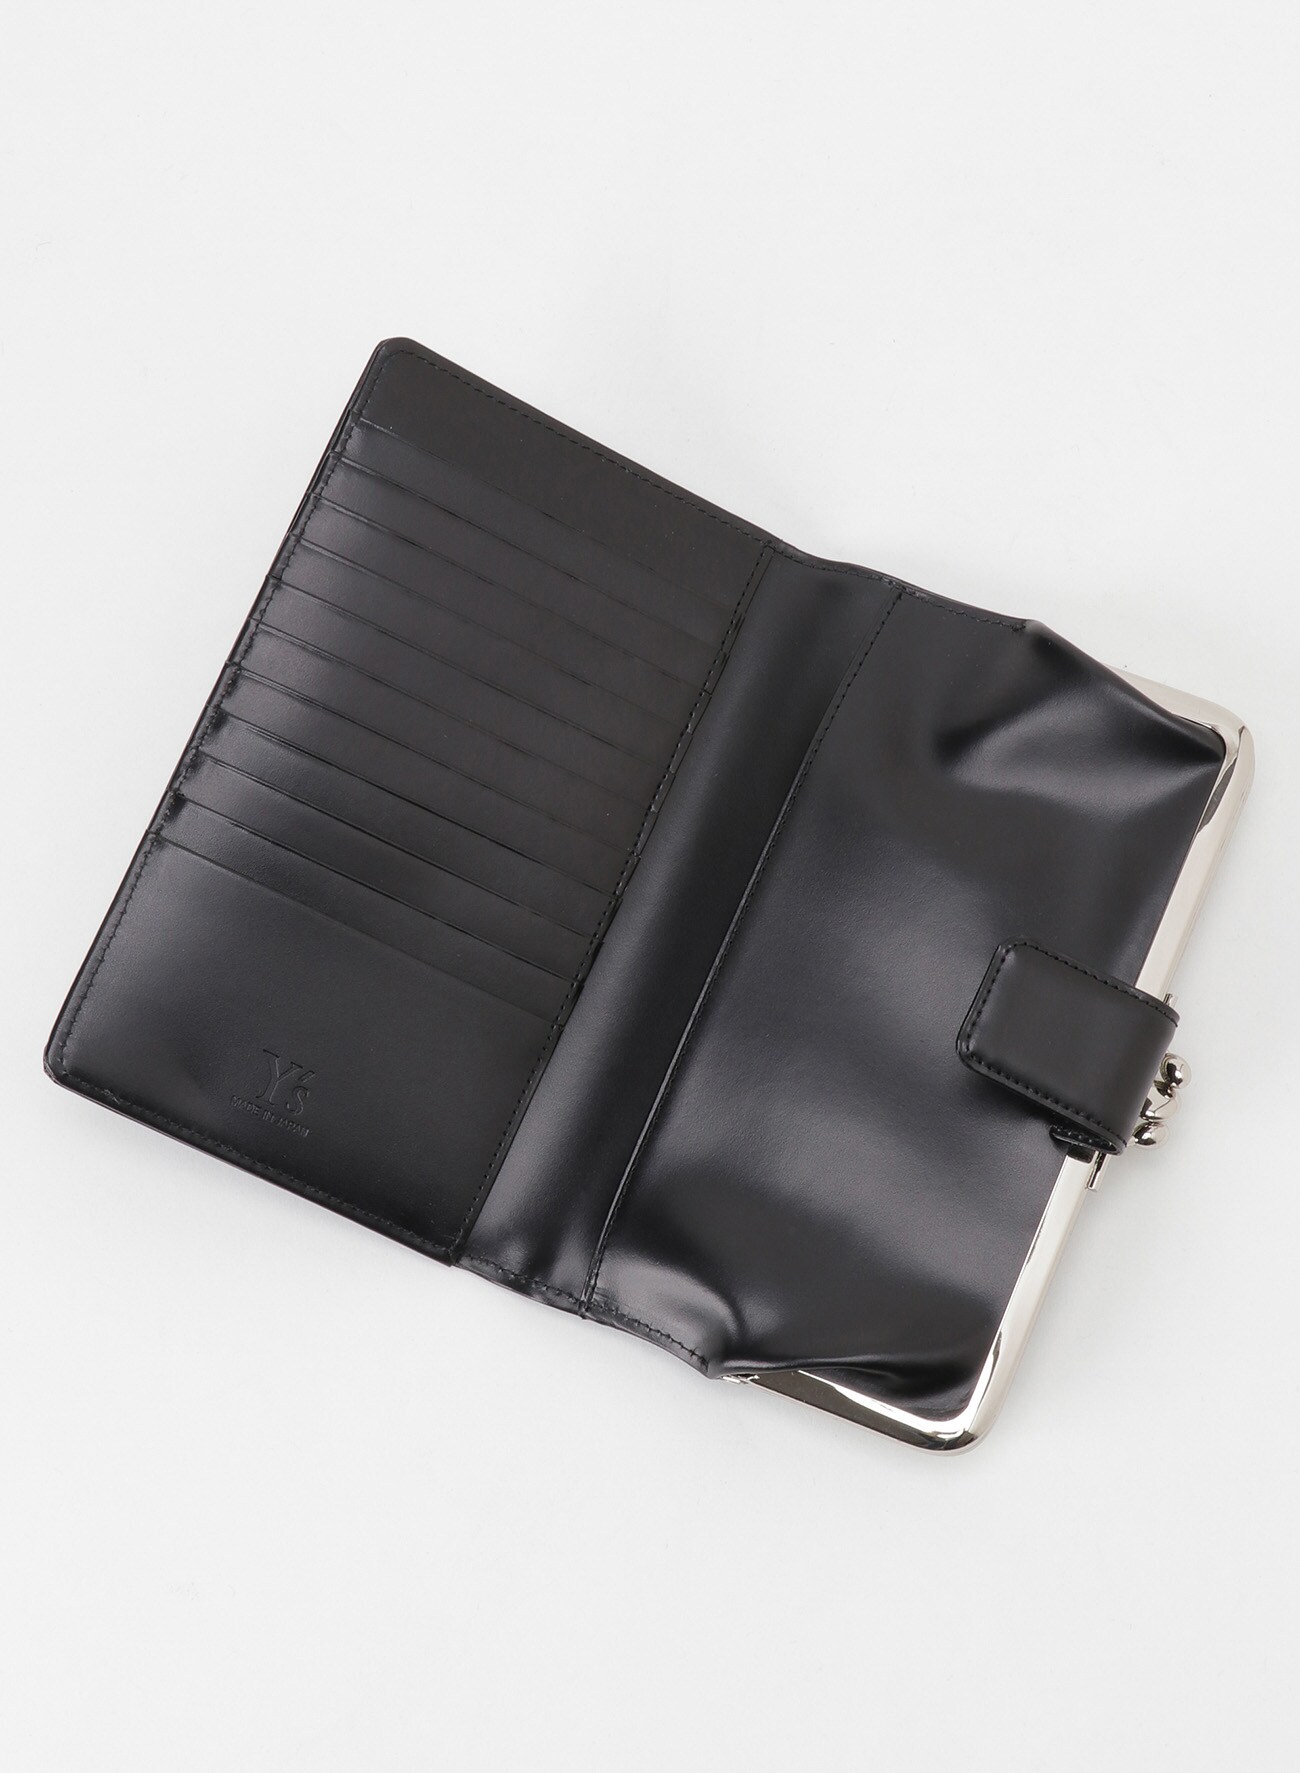 GLOSS SMOOTH LEATHER LONG WALLETFREE SIZE Black: Y's｜THE SHOP